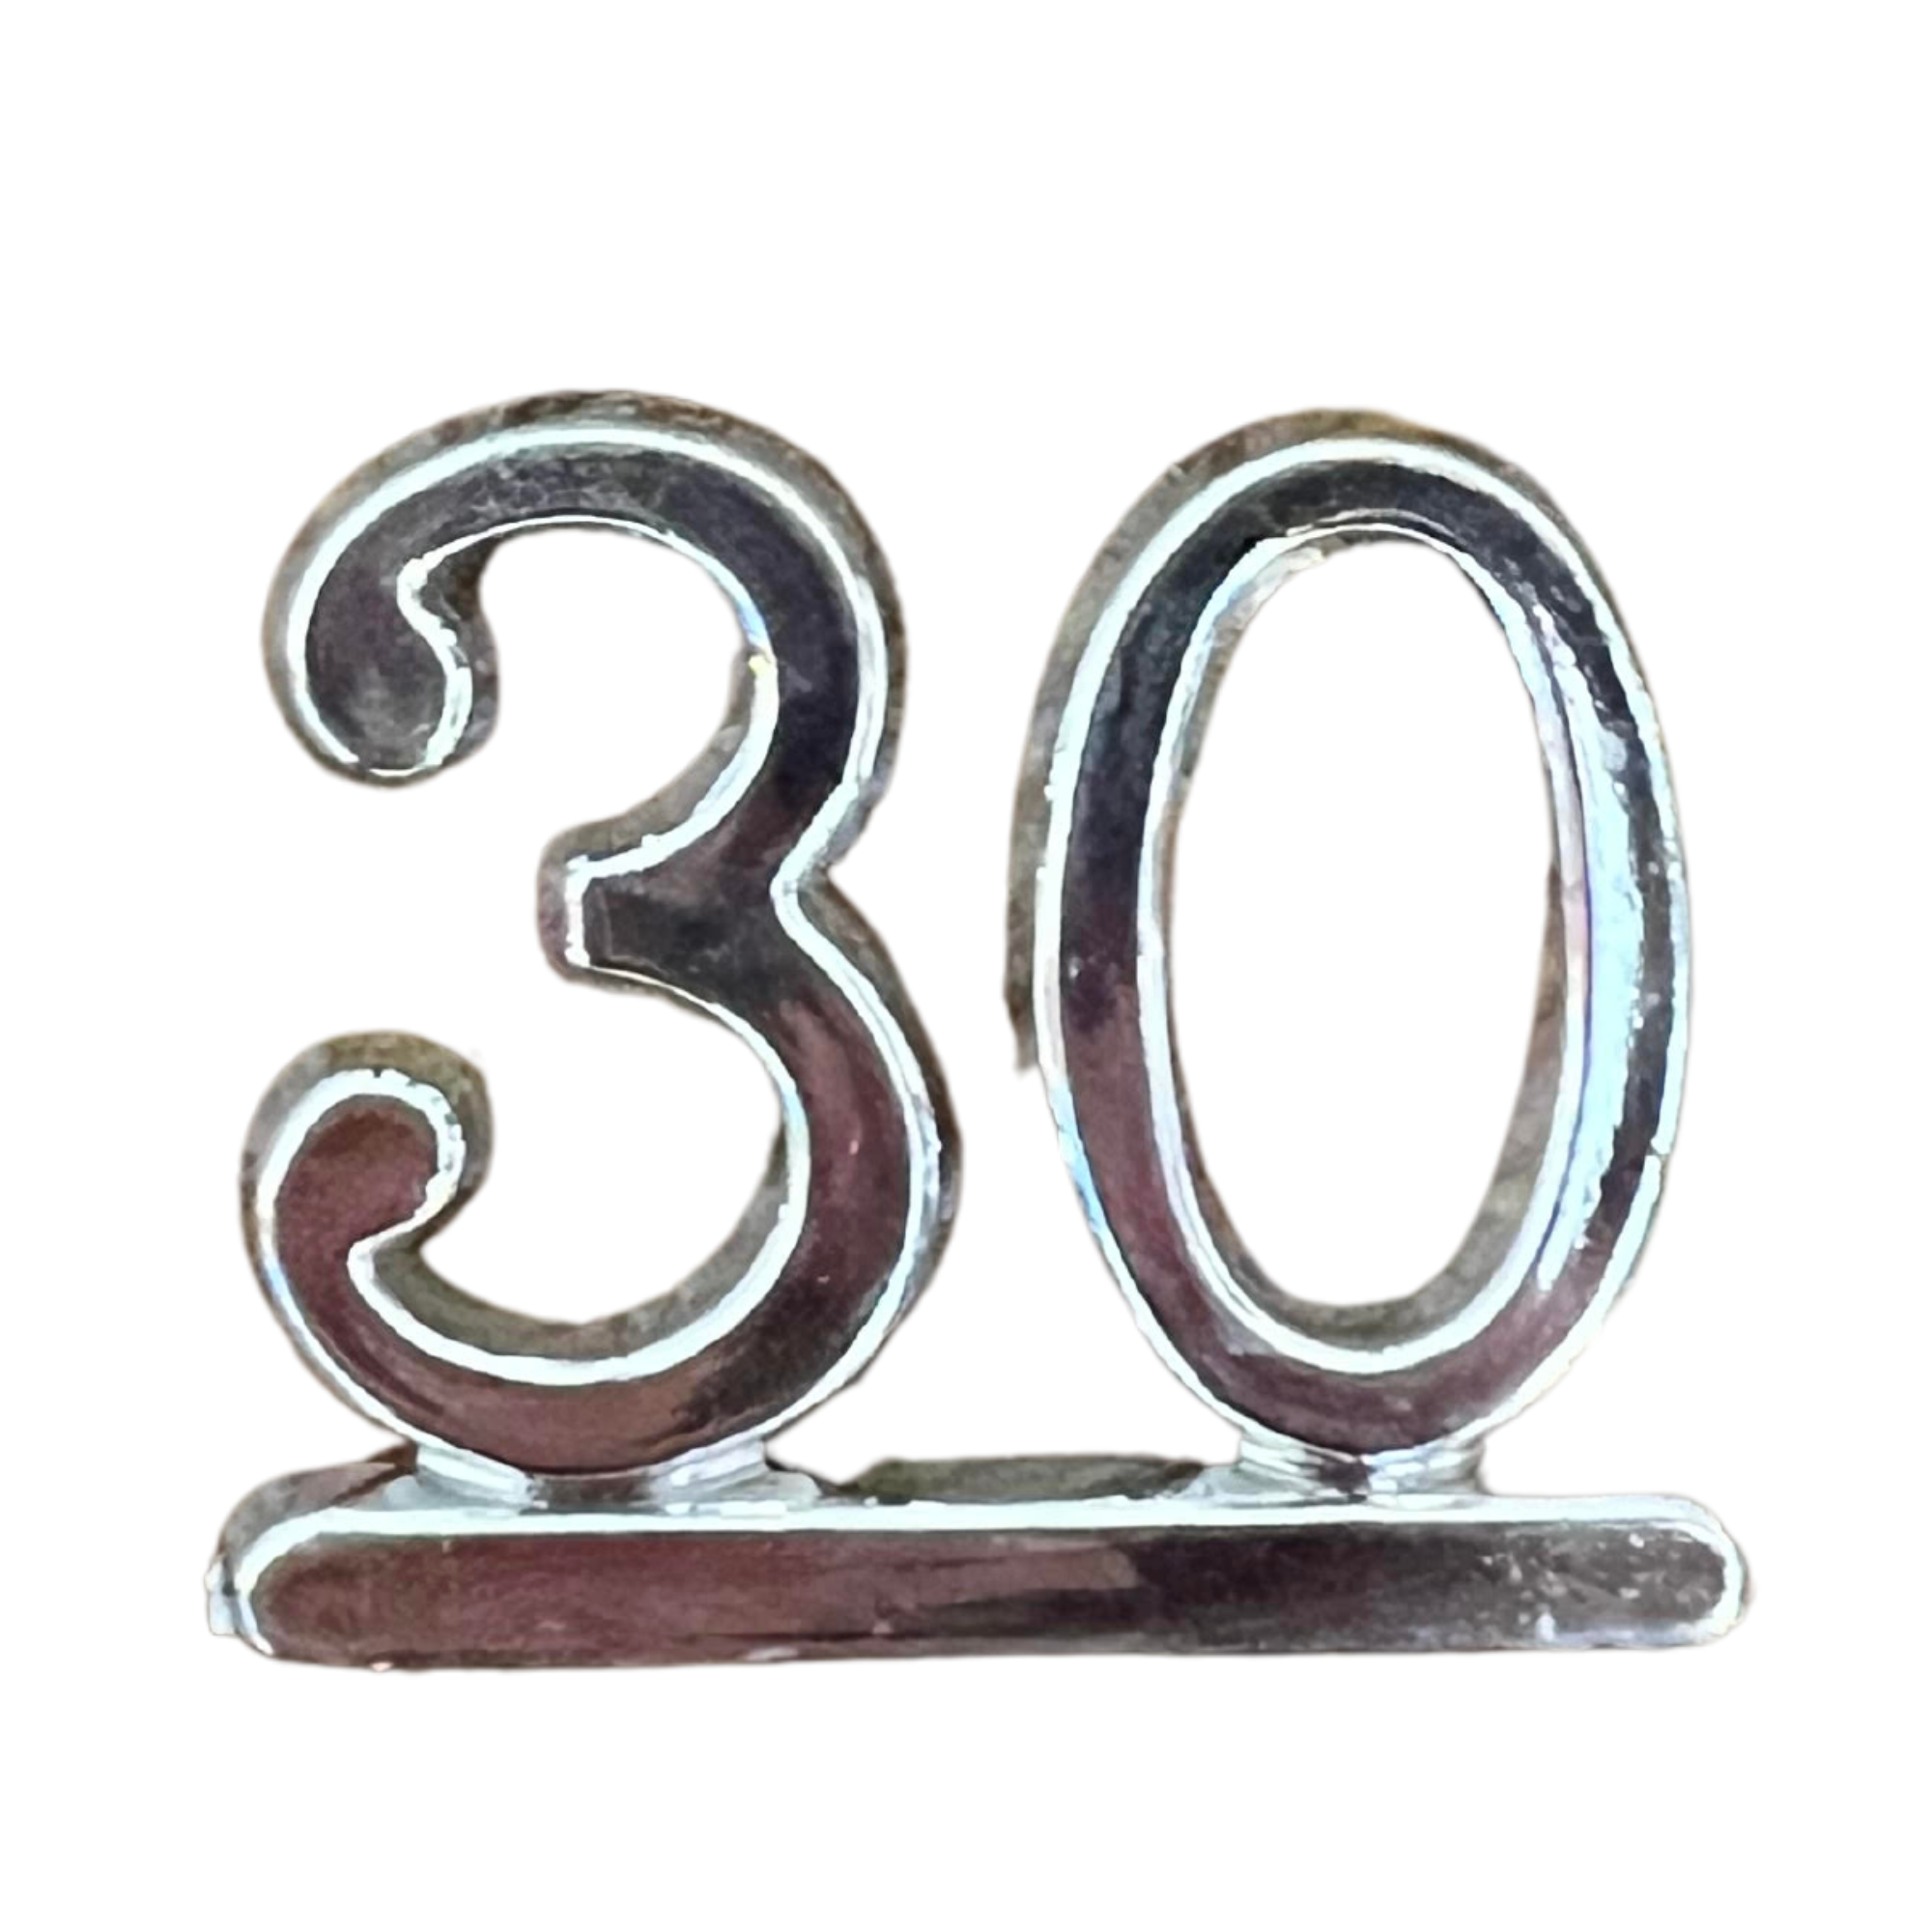 Small Number / Numeral Plastic Cake or Craft Decoration - Silver 30